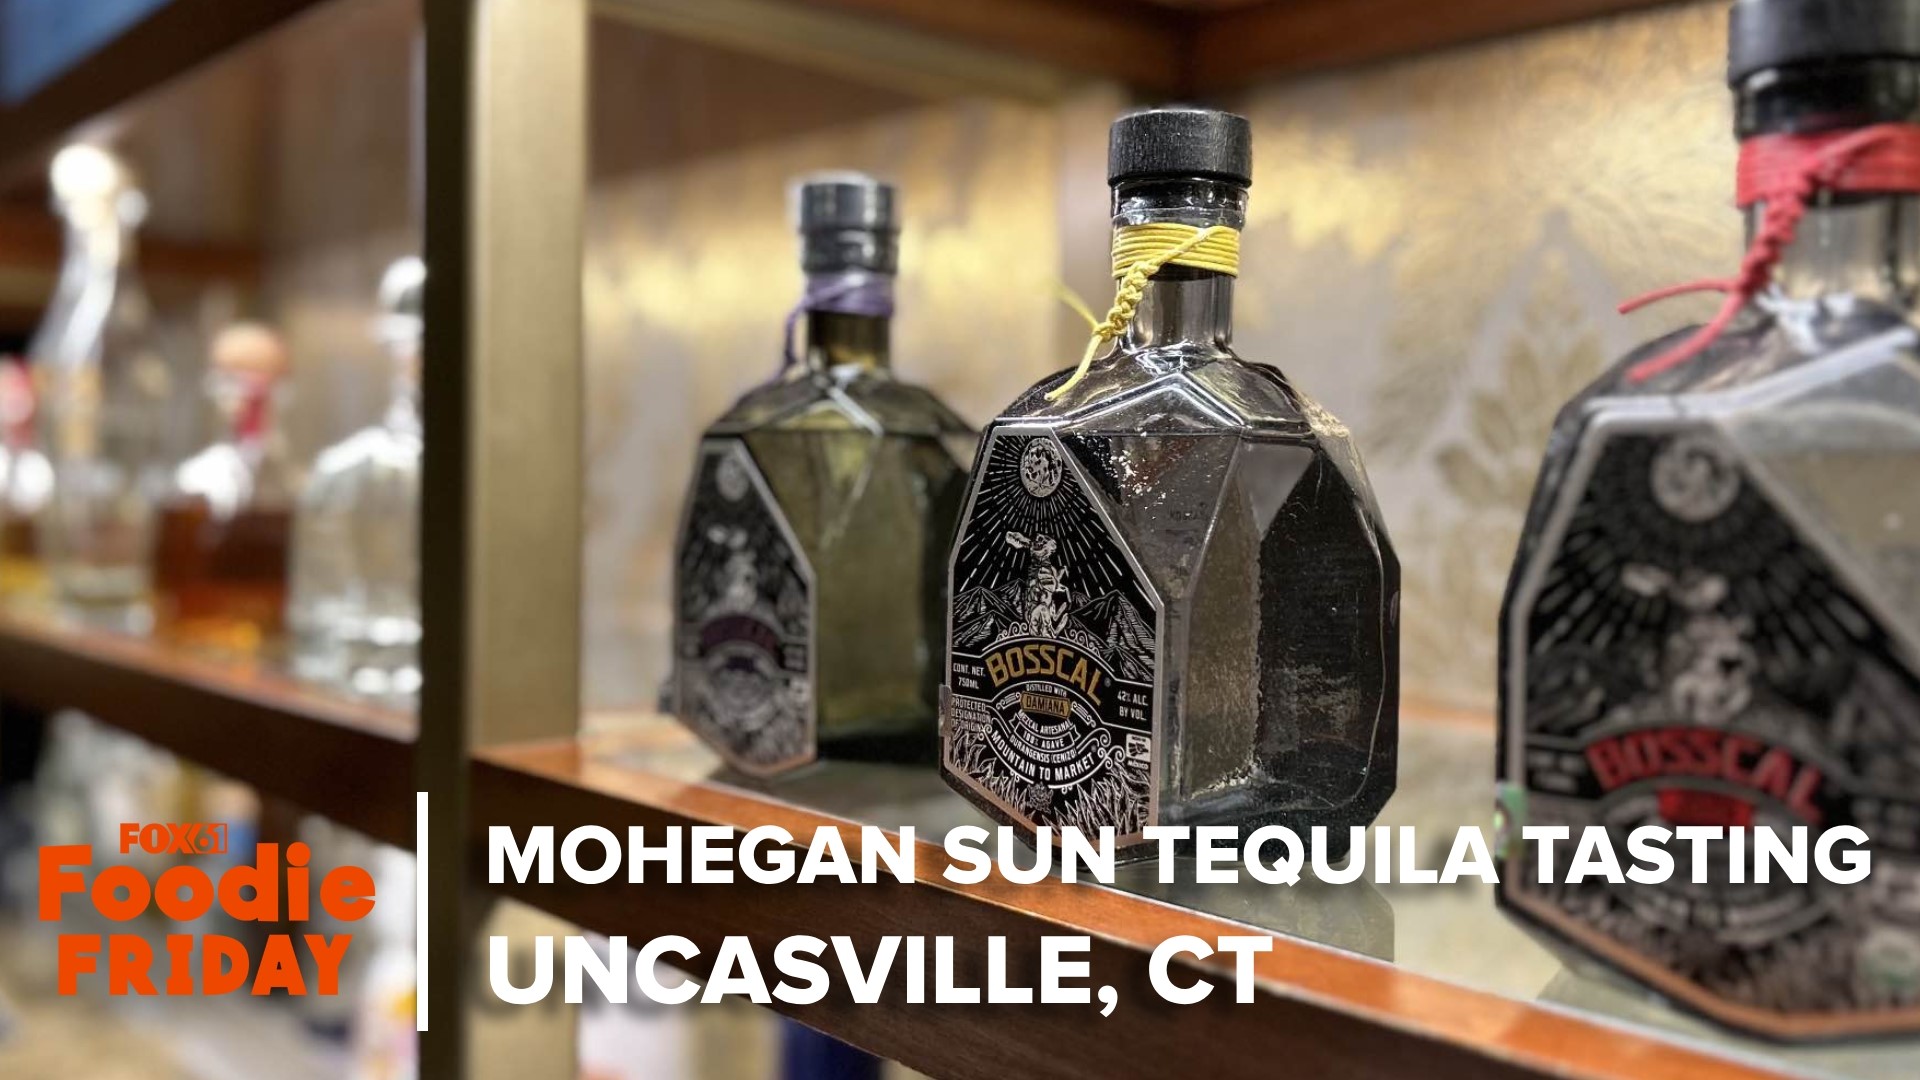 At Mohegan Sun this weekend, the Sun Tequila Tasting is taking place. FOX61's Matt Scott got to preview the event for Foodie Friday.